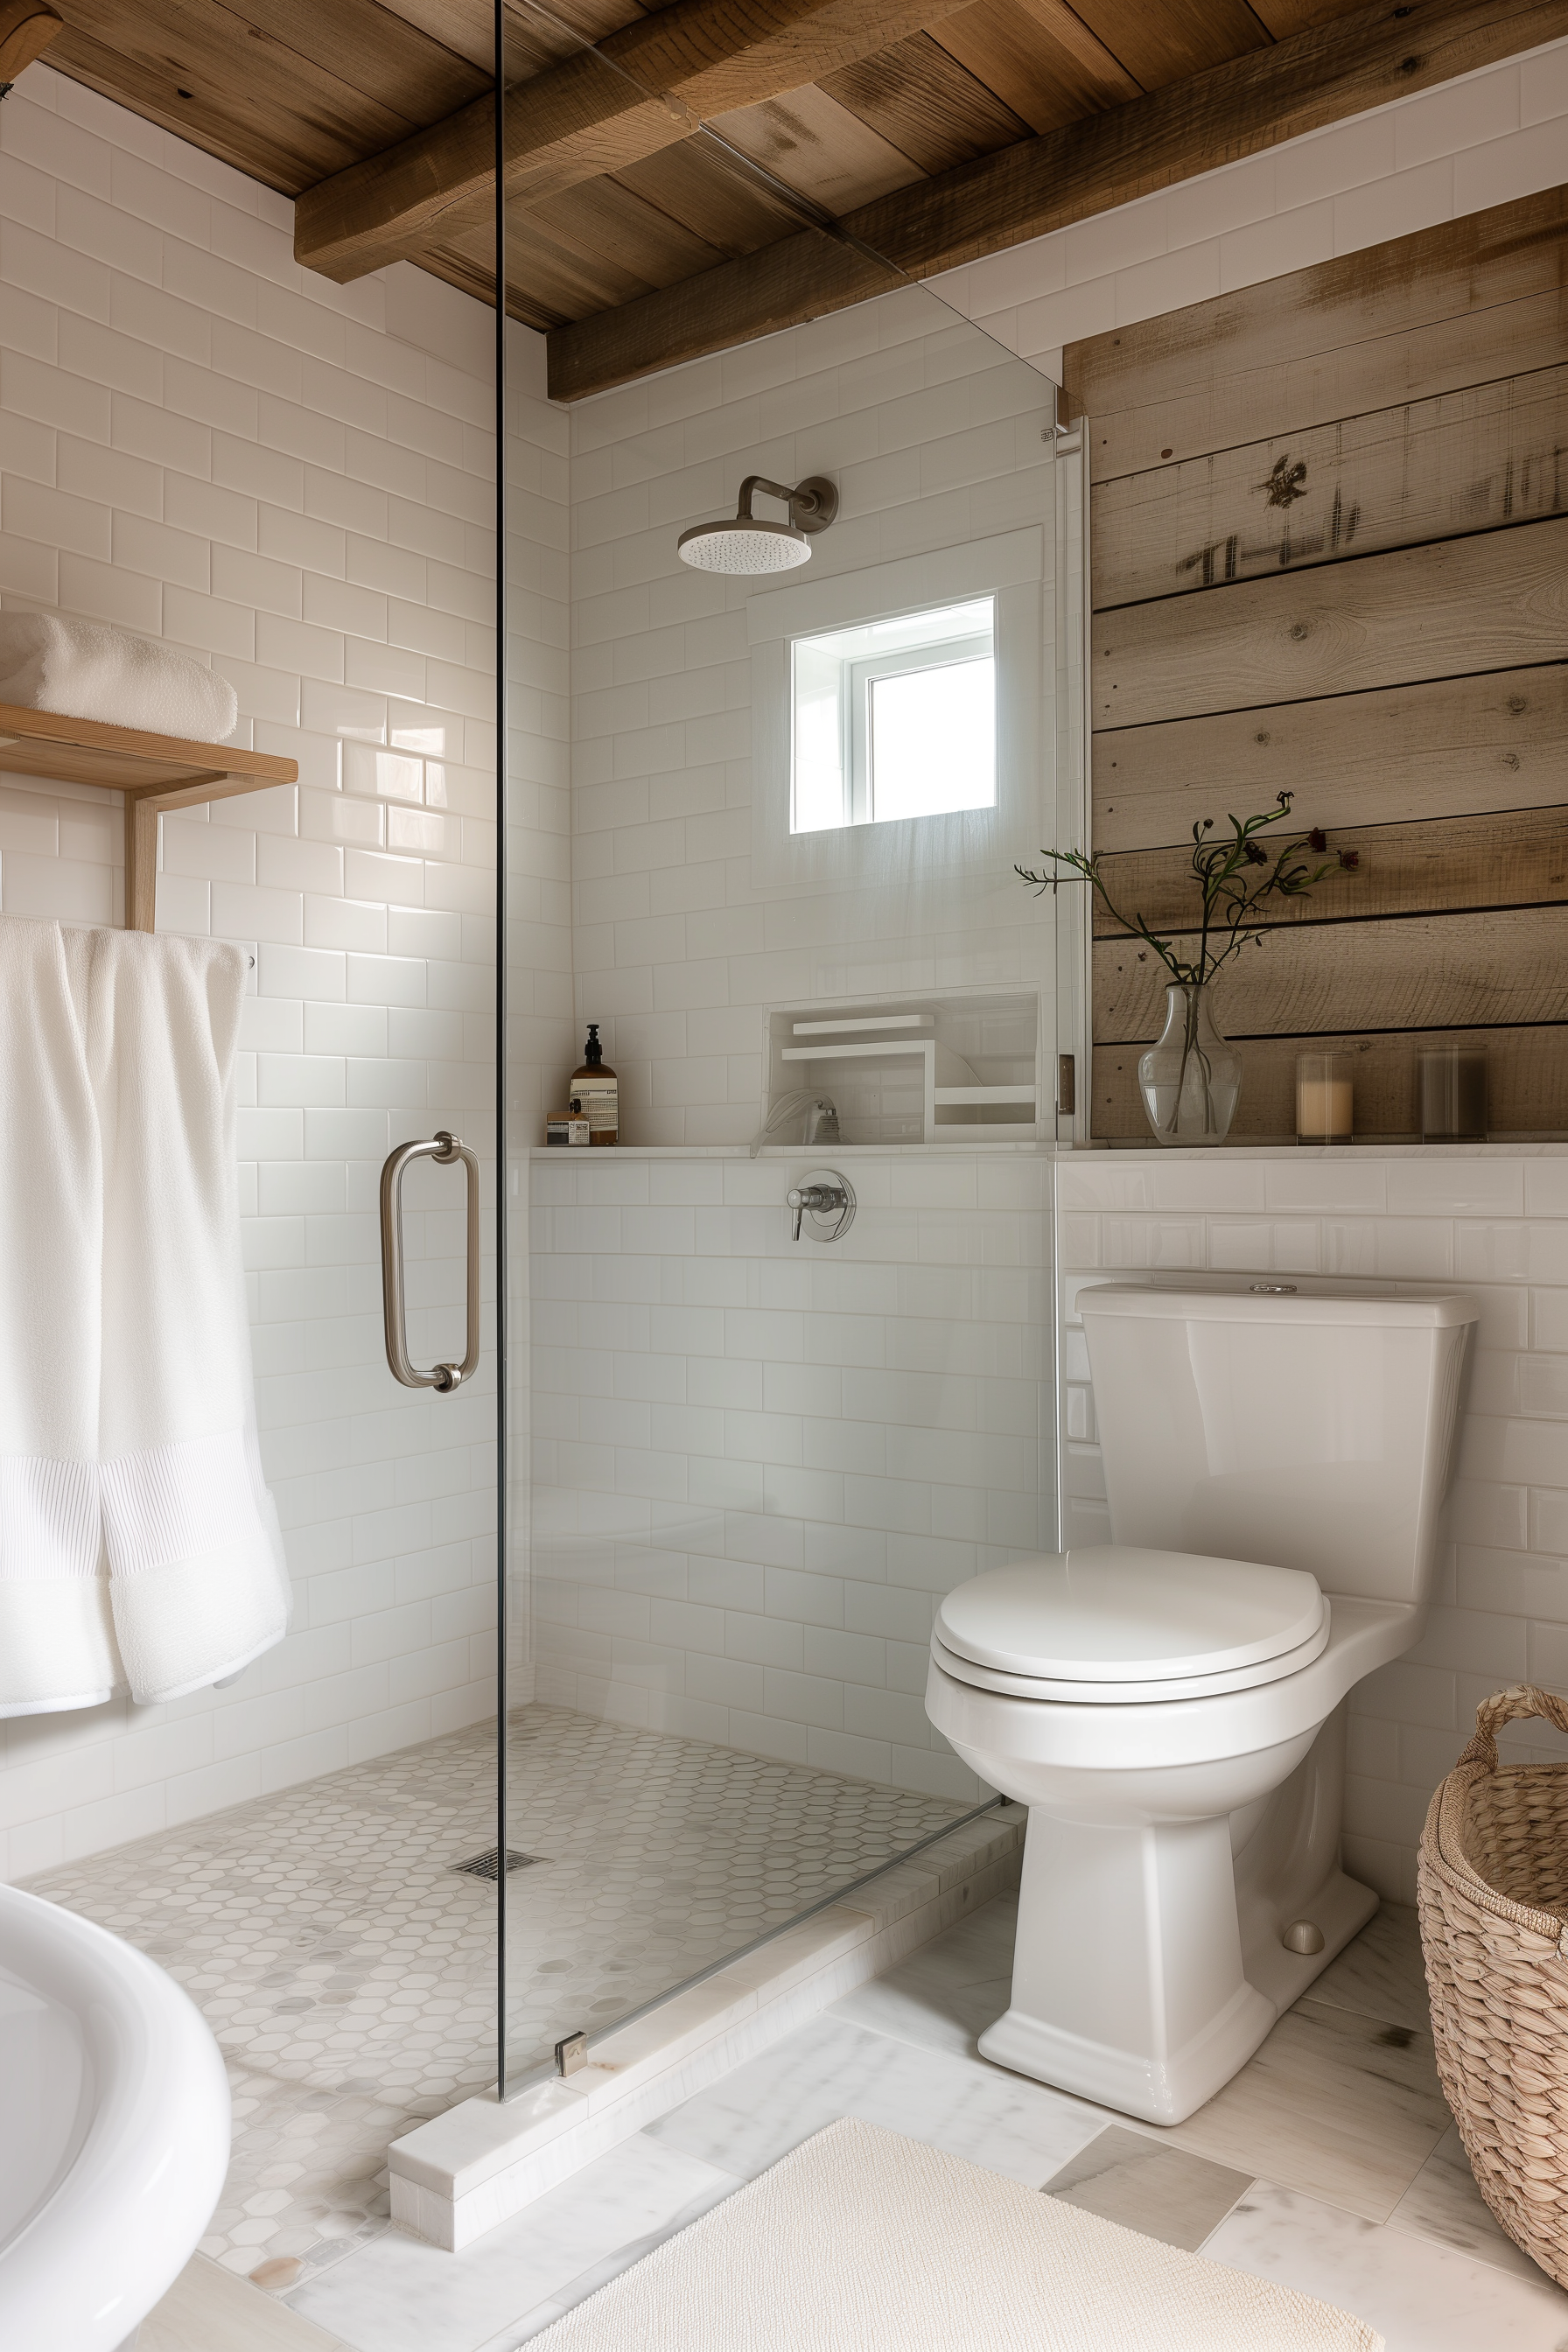 A white bathroom with wooden panelling and a woven basket